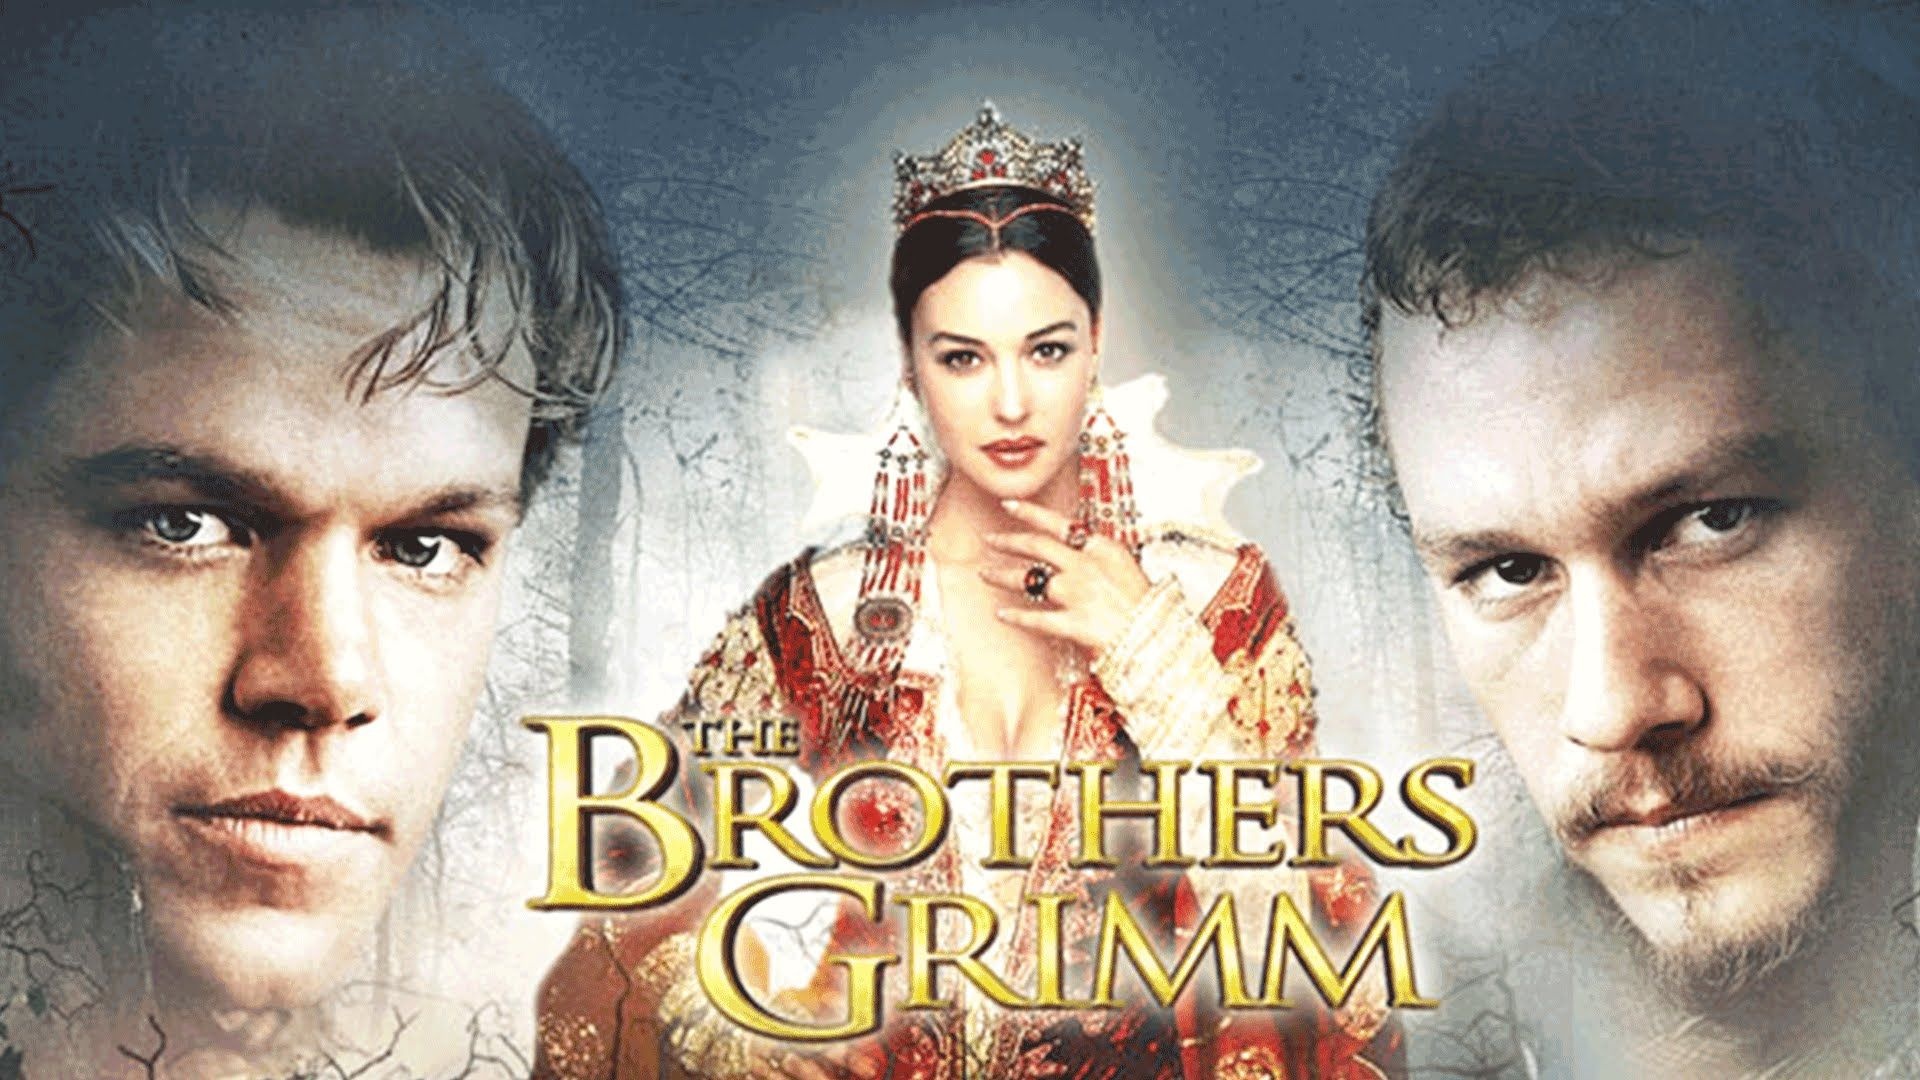 The Brothers Grimm, Epic fantasy journey, Damon and Ledger, Miramax production, 1920x1080 Full HD Desktop